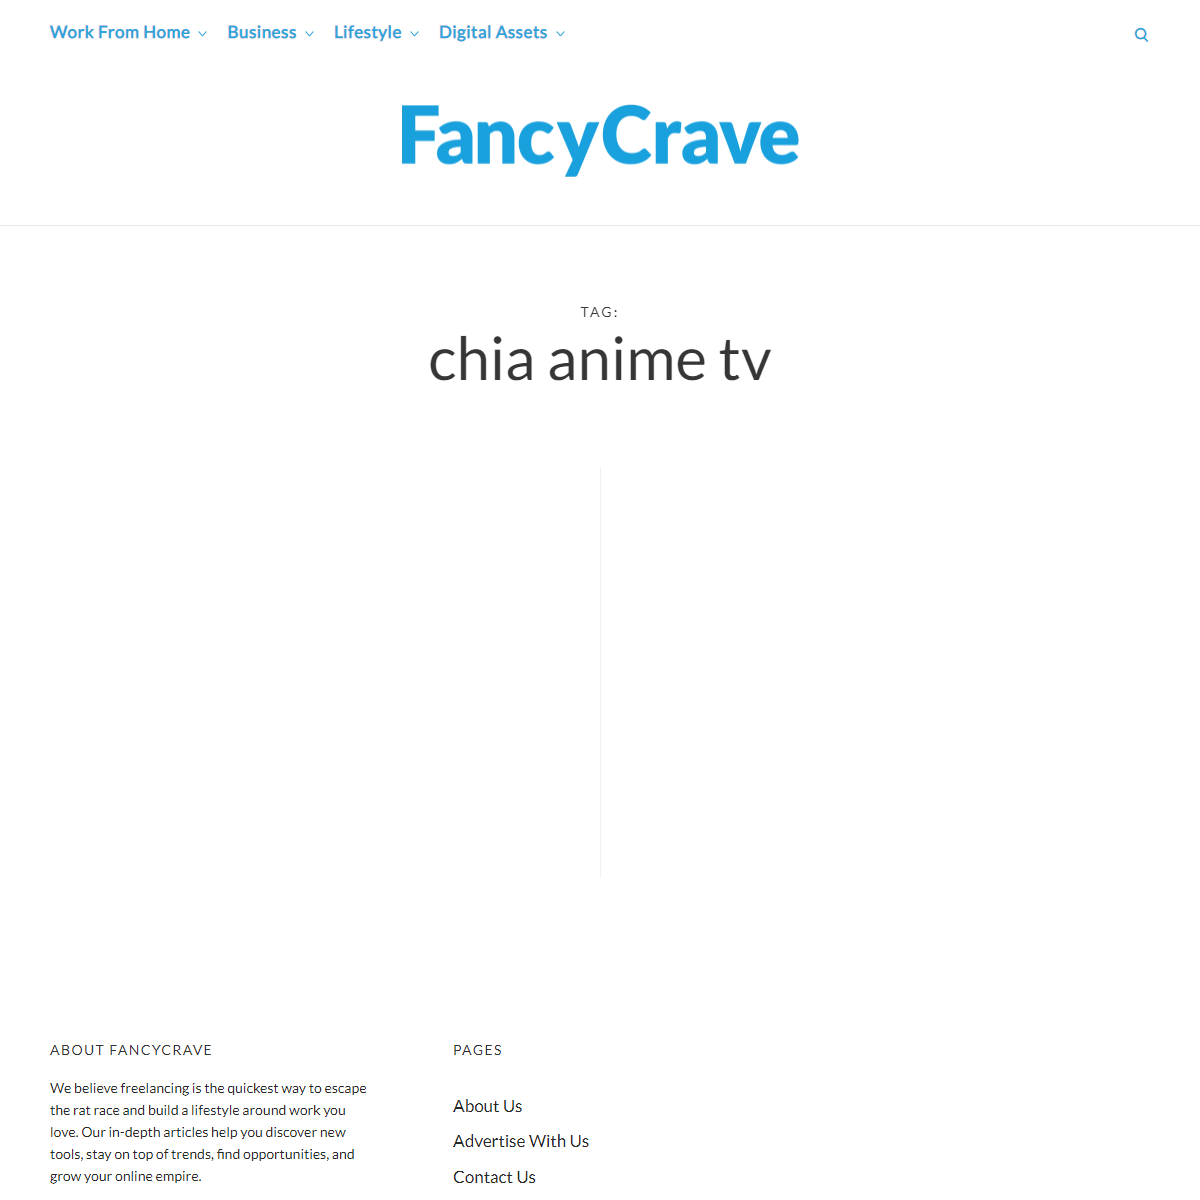 A complete backup of https://fancycrave.com/tag/chia-anime-tv/